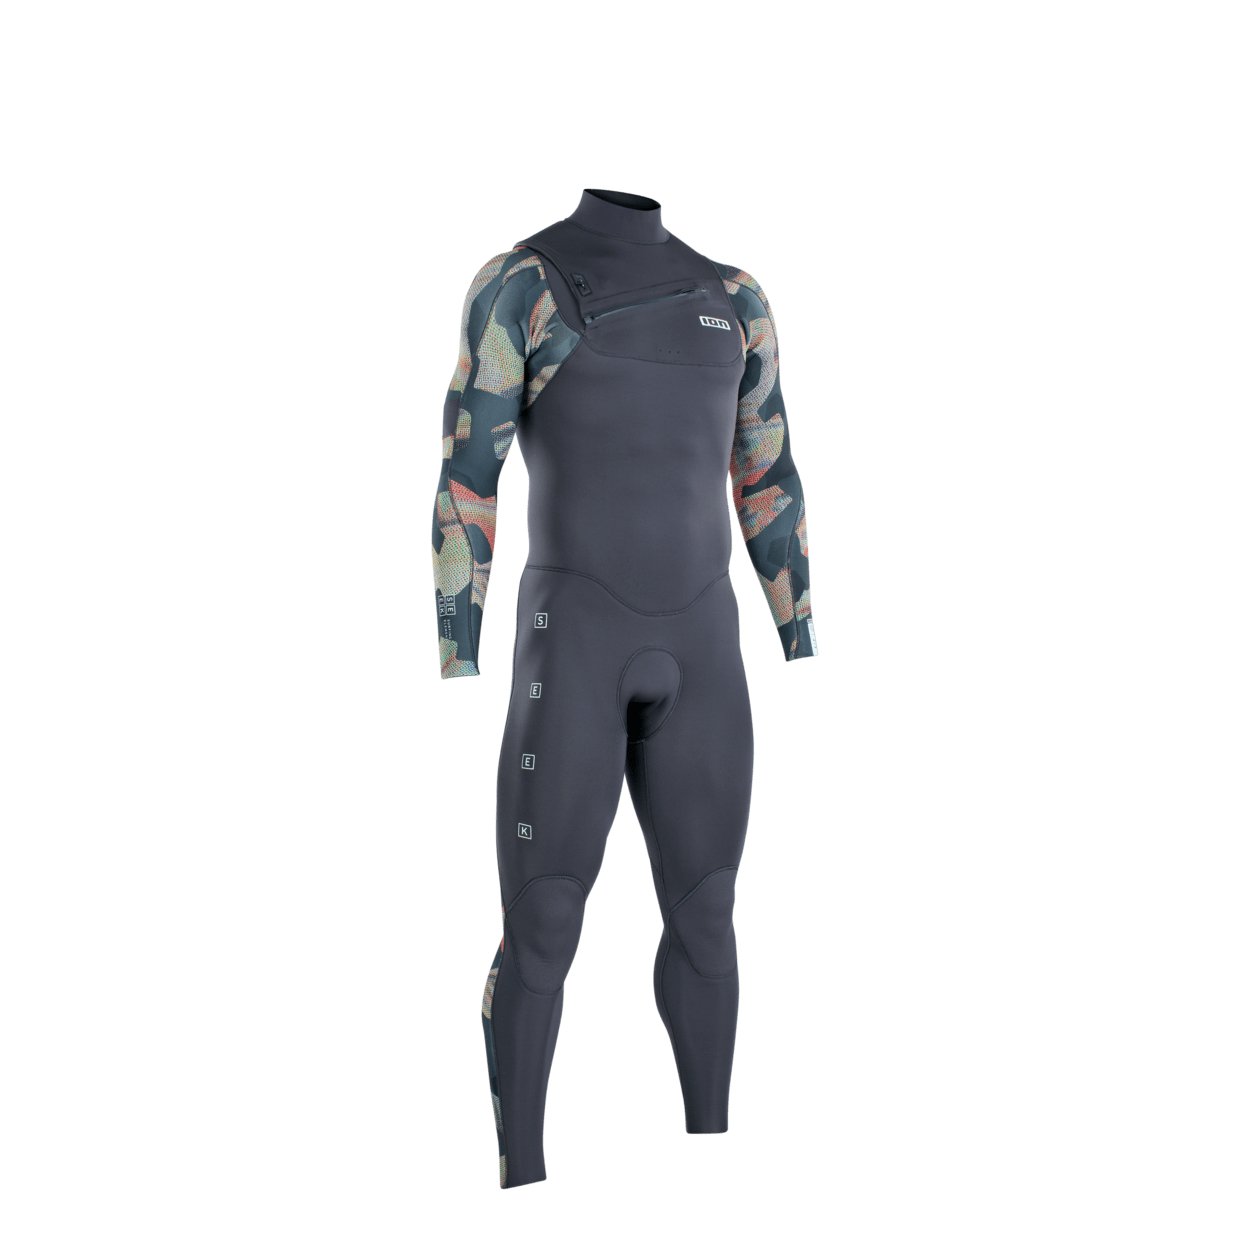 ION Seek Core 3/2 Front Zip 2022 - Worthing Watersports - 9010583057132 - Wetsuits - ION Water